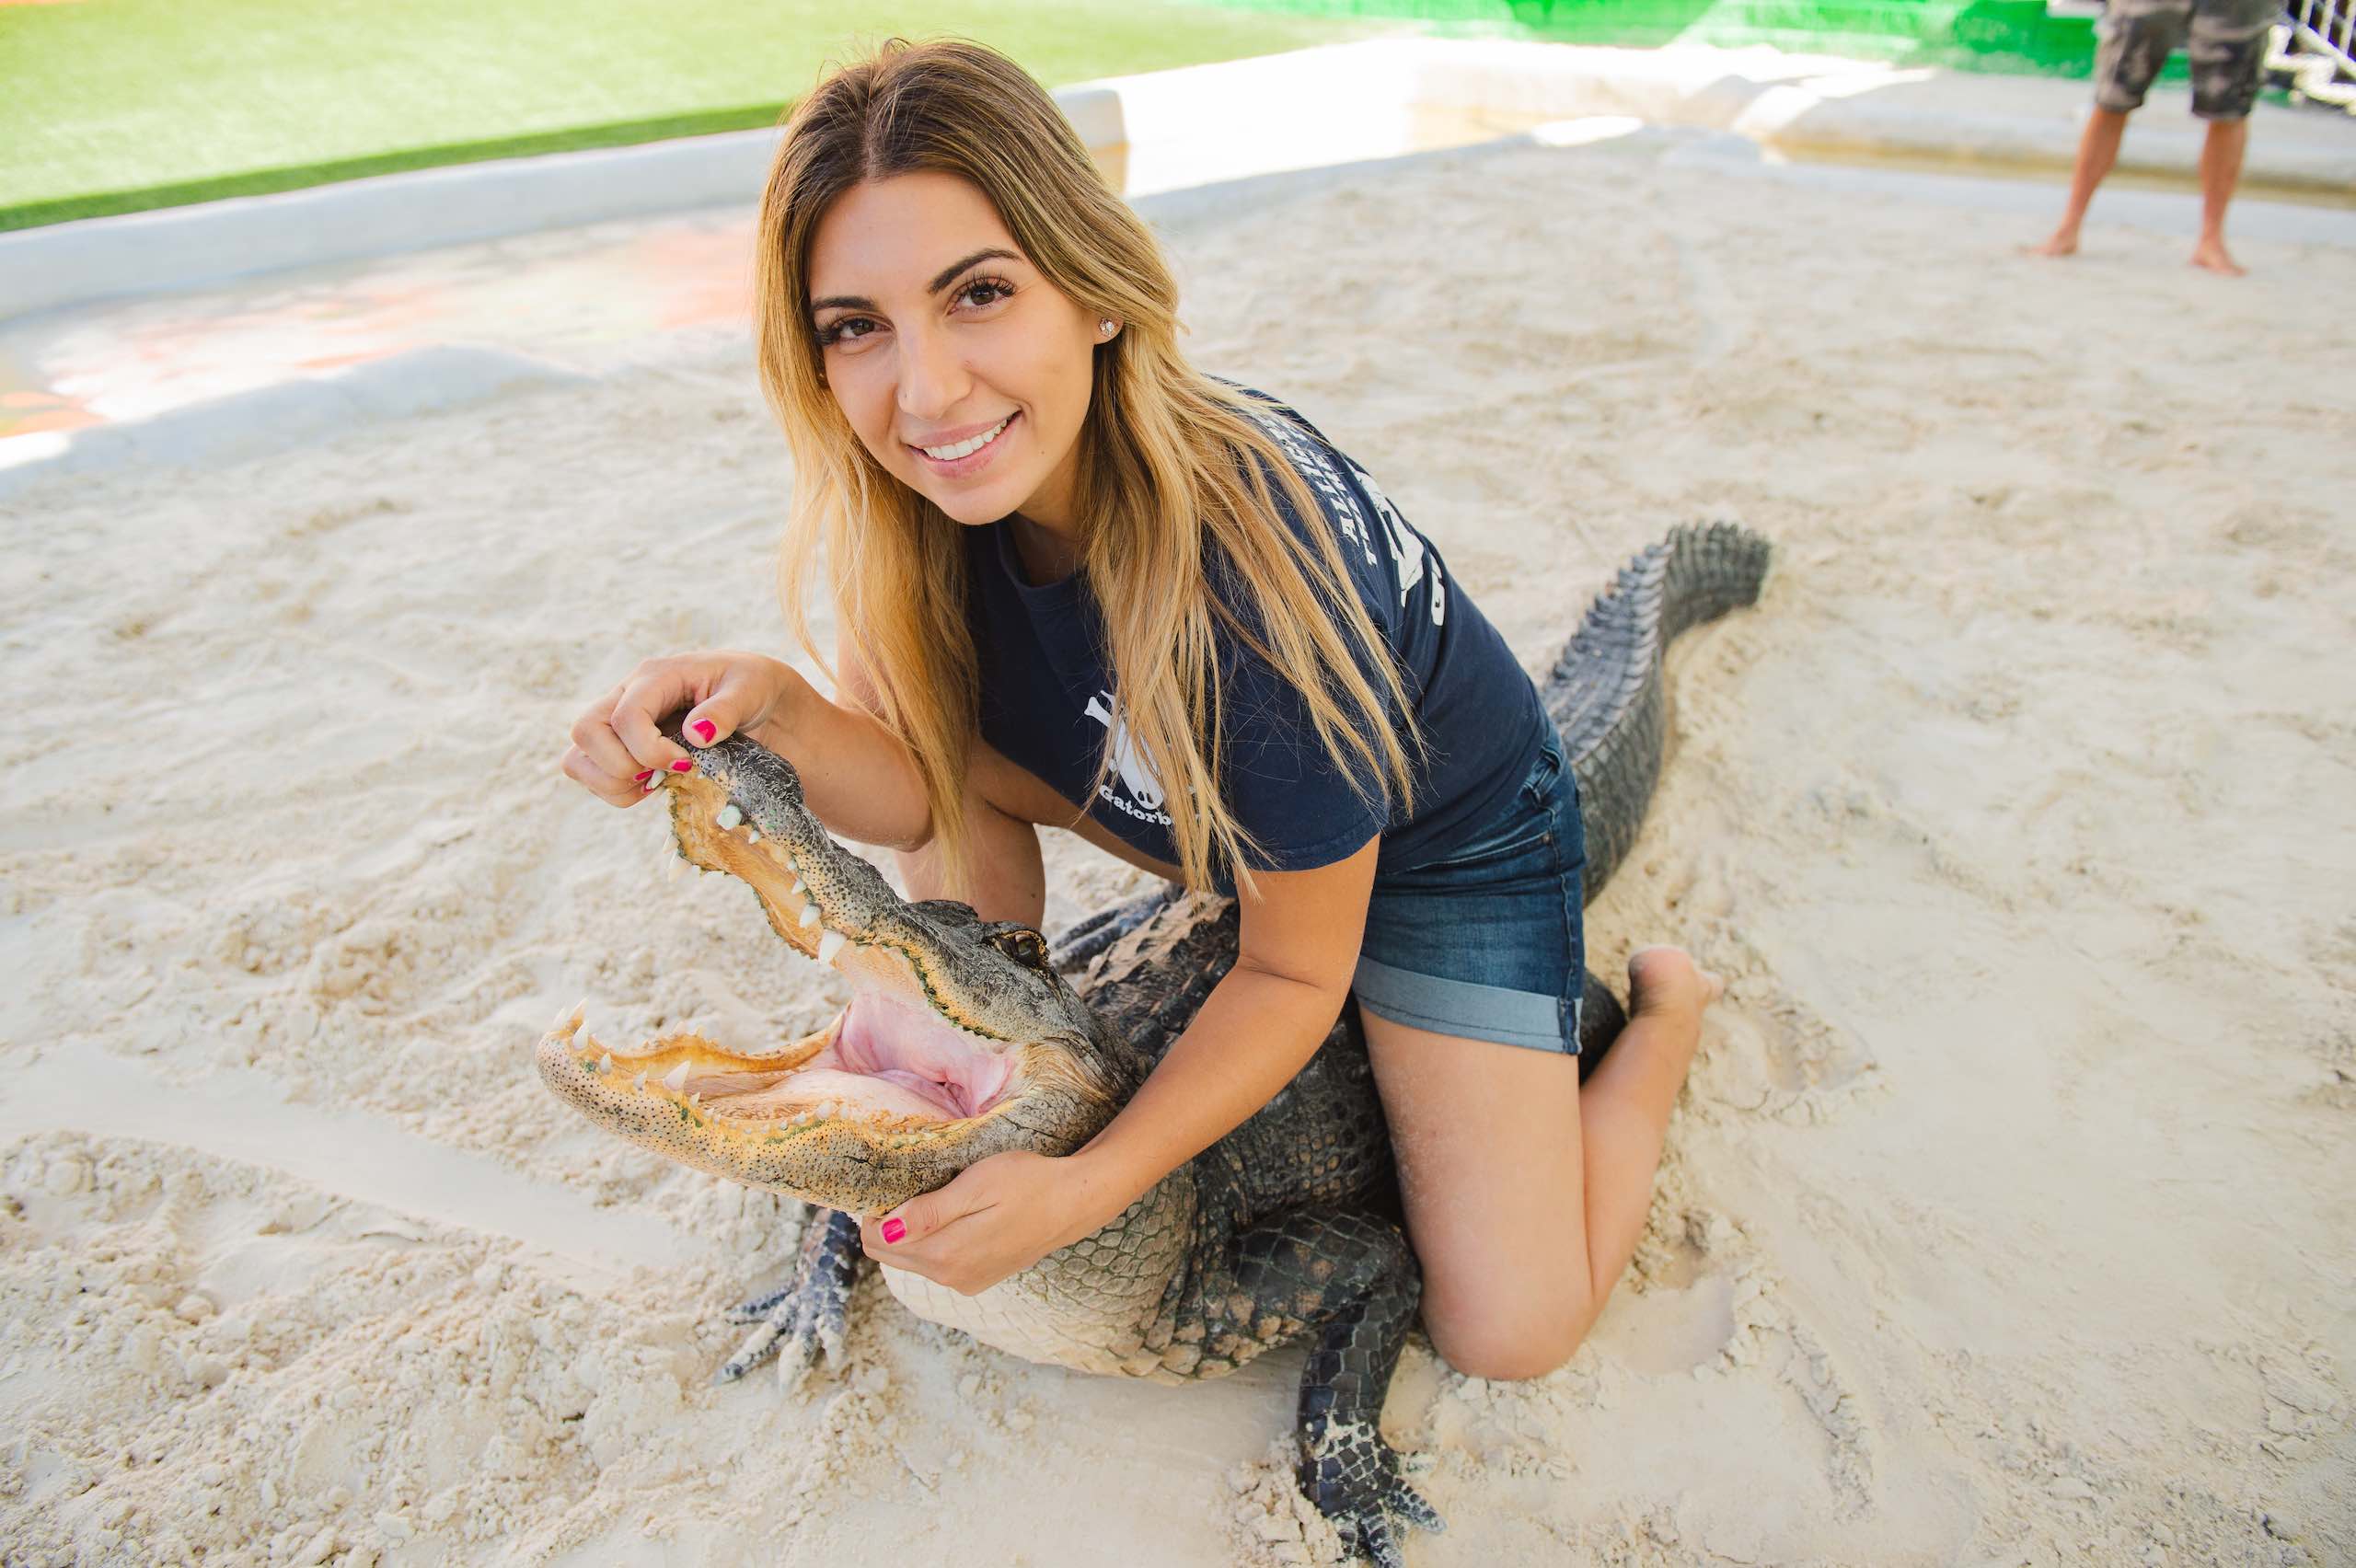 Everglades Holiday Park Woman with long blond hair sitting on an alligator holding its mouth open in a sand pit